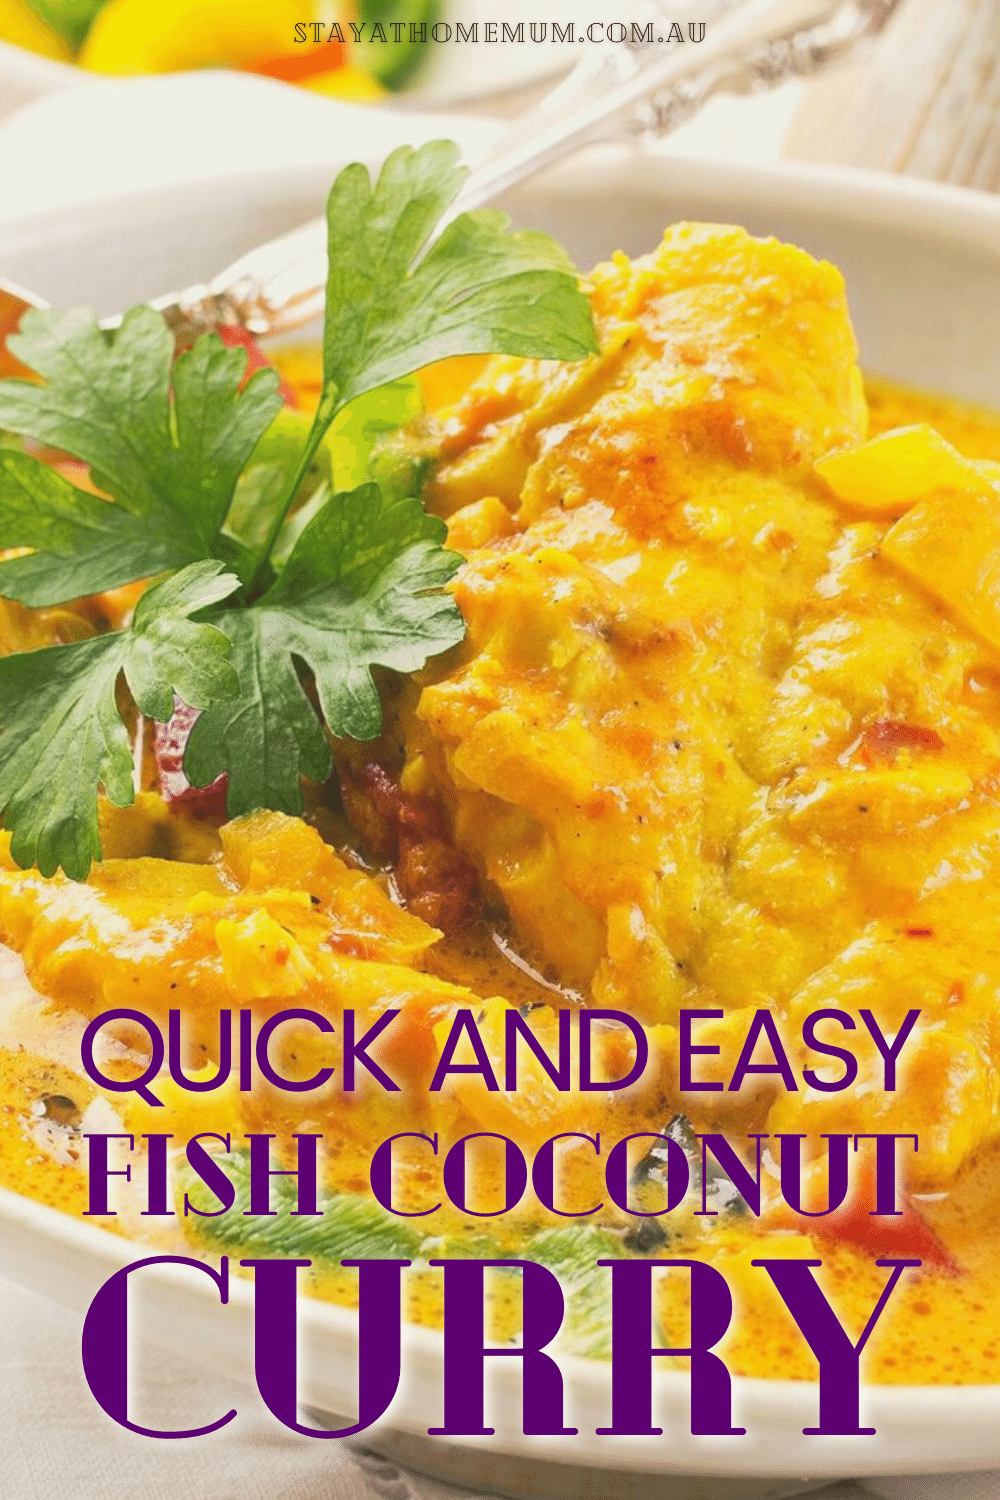 Quick and Easy Fish Coconut Curry | Stay At Home Mum